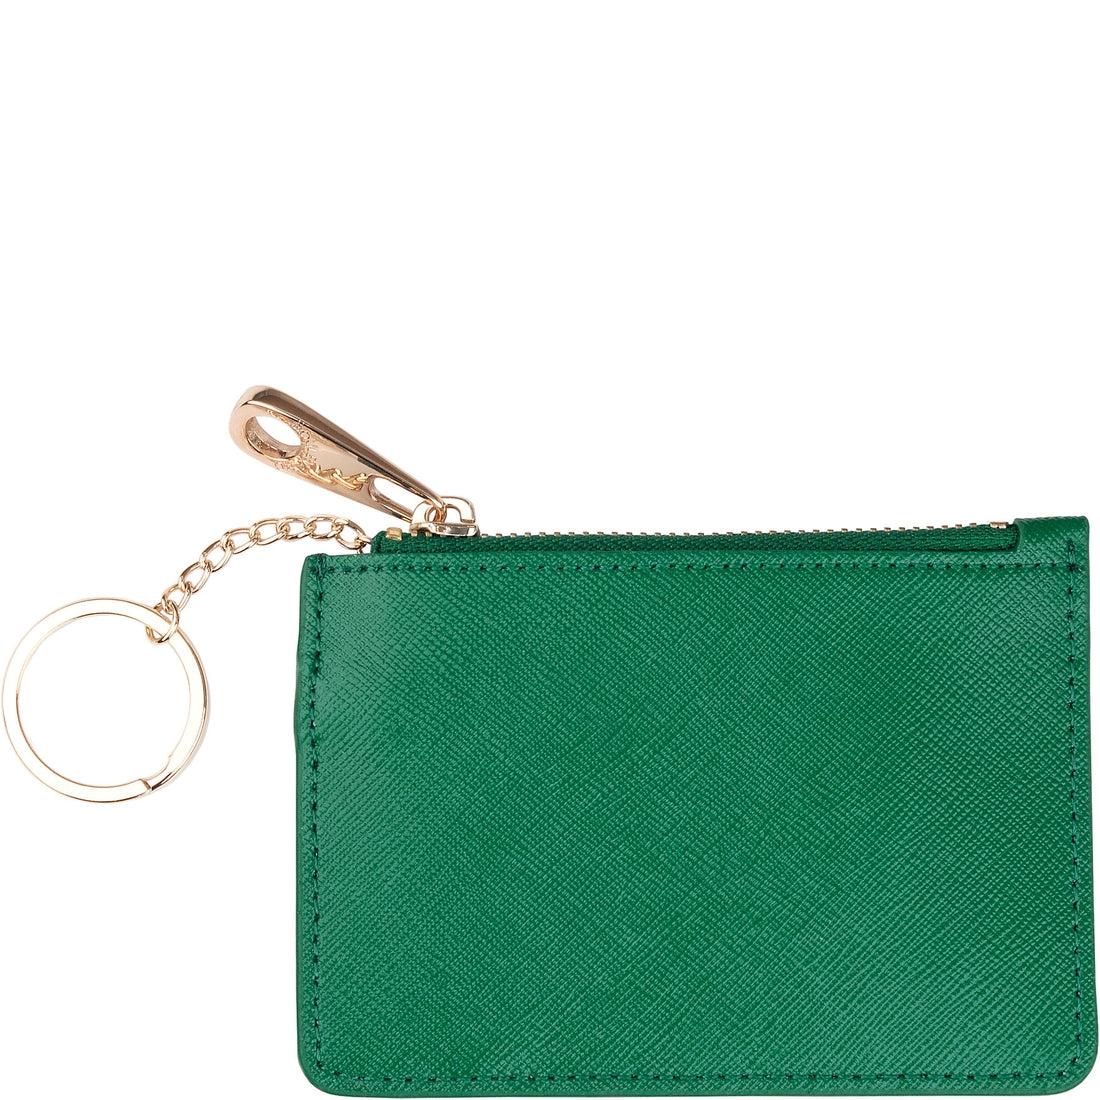 BLVD Ivy Leather Wallet